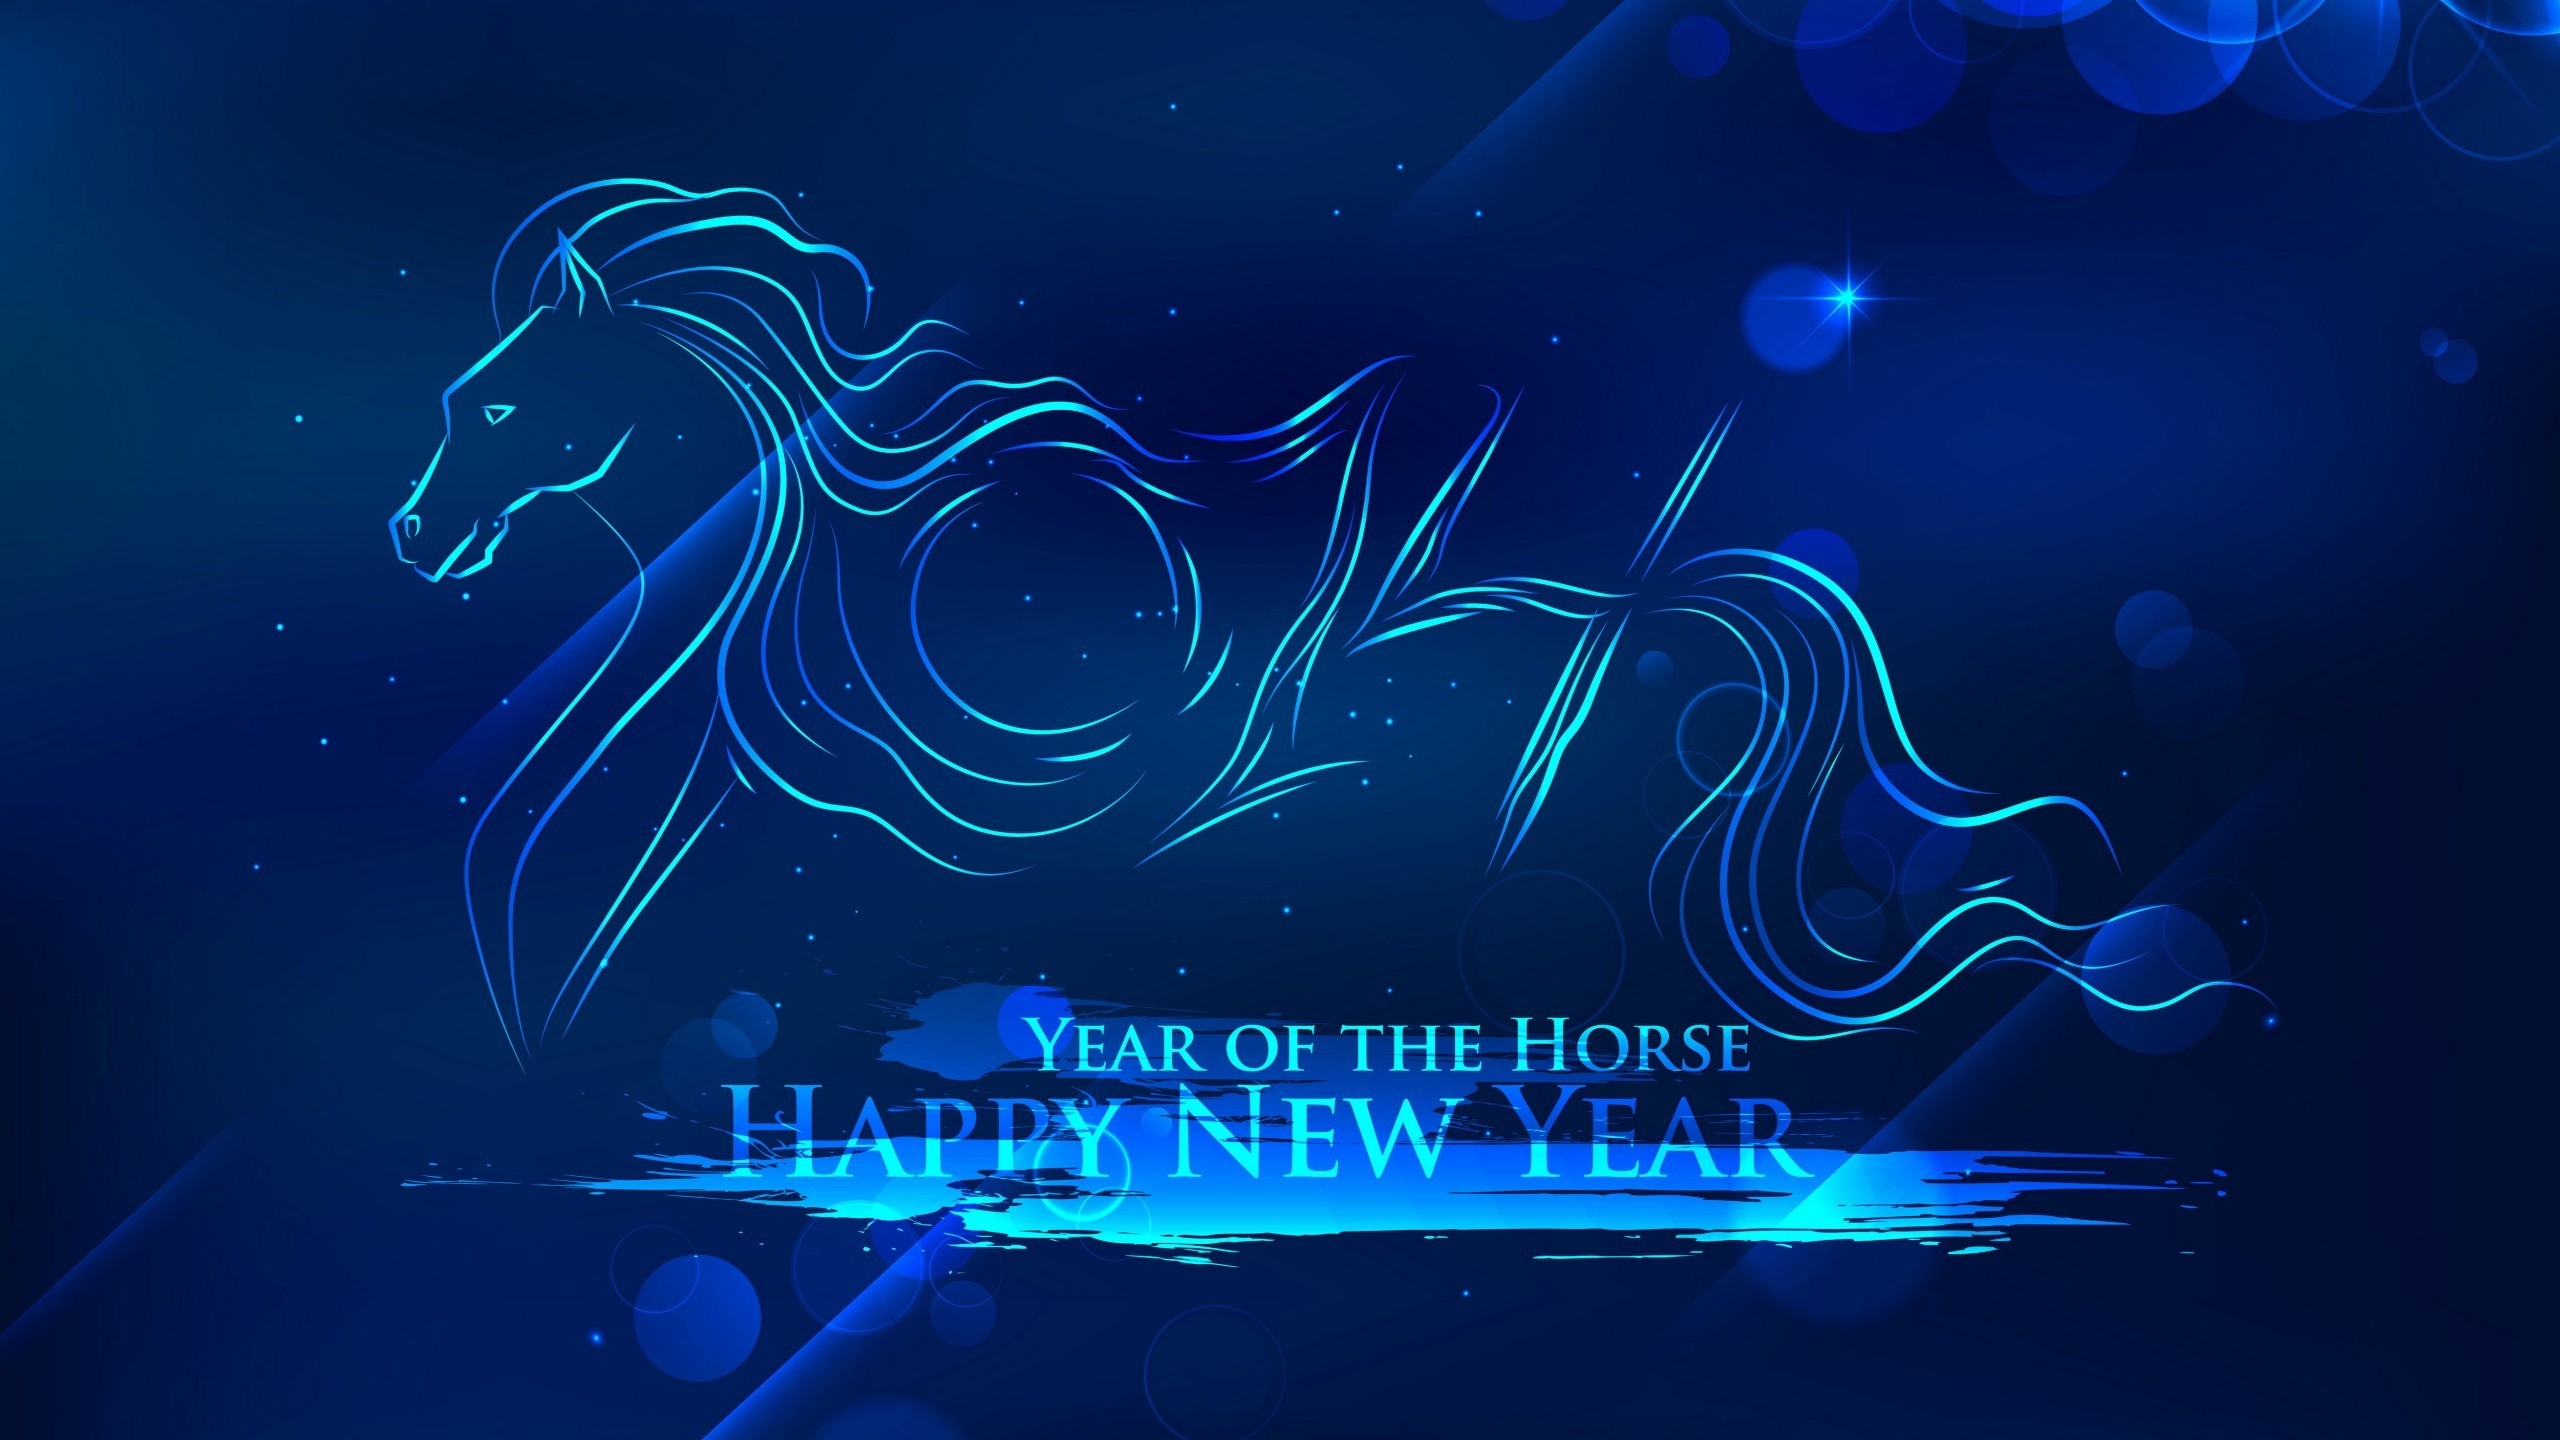 2014 Horse Year for 2560x1440 HDTV resolution